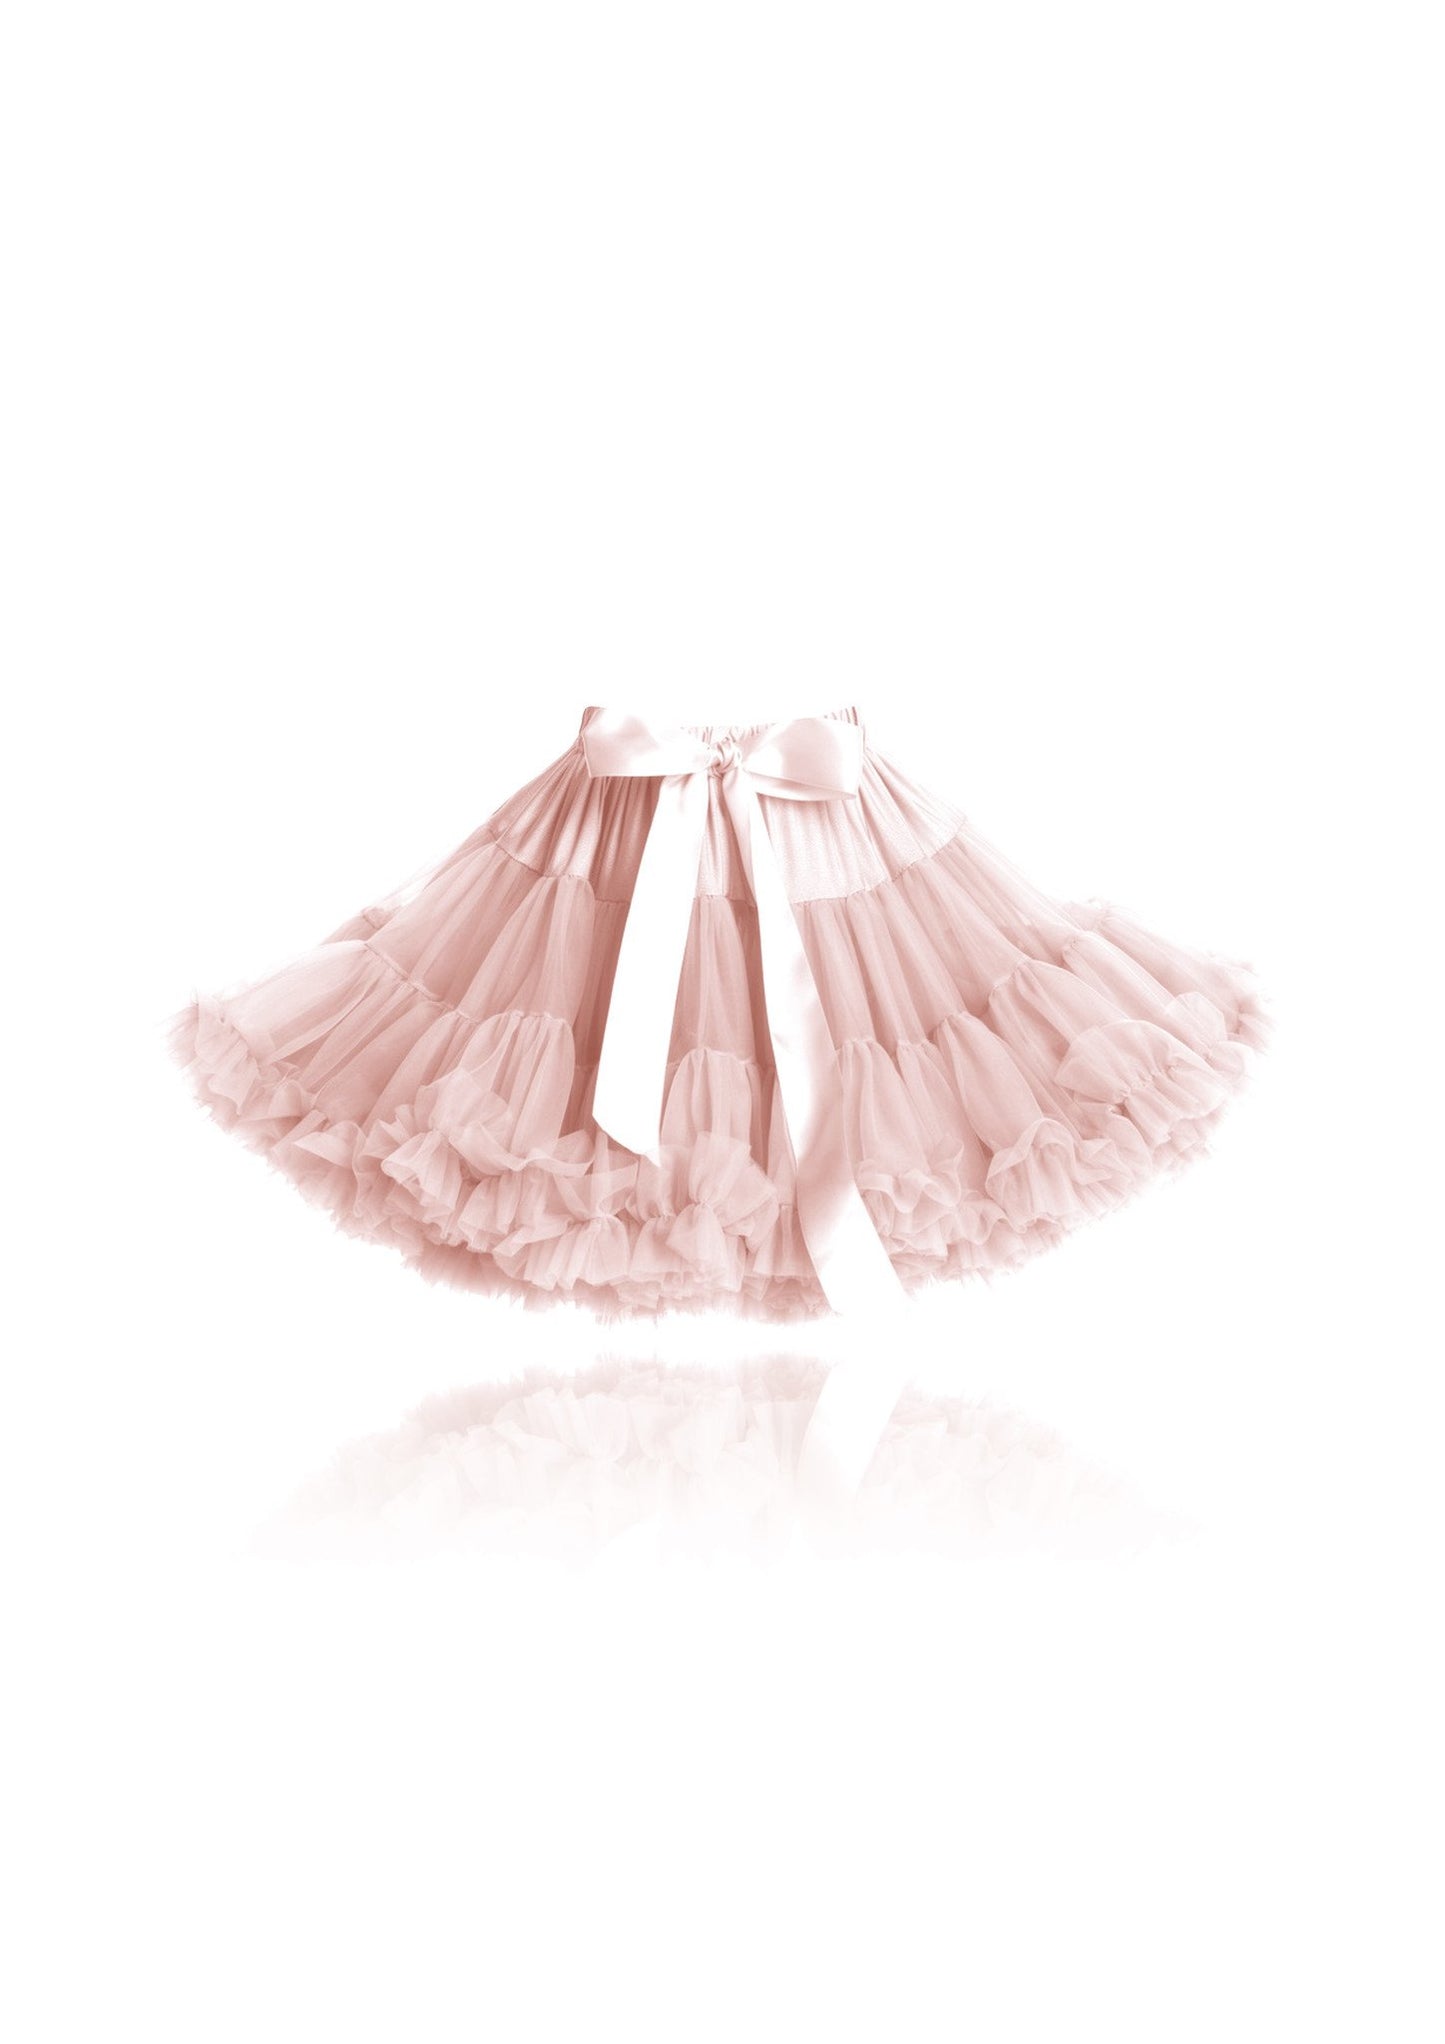 DOLLY by Le Petit Tom ® DOROTHY in the land of DOLLS pettiskirt ballet pink - DOLLY by Le Petit Tom ®